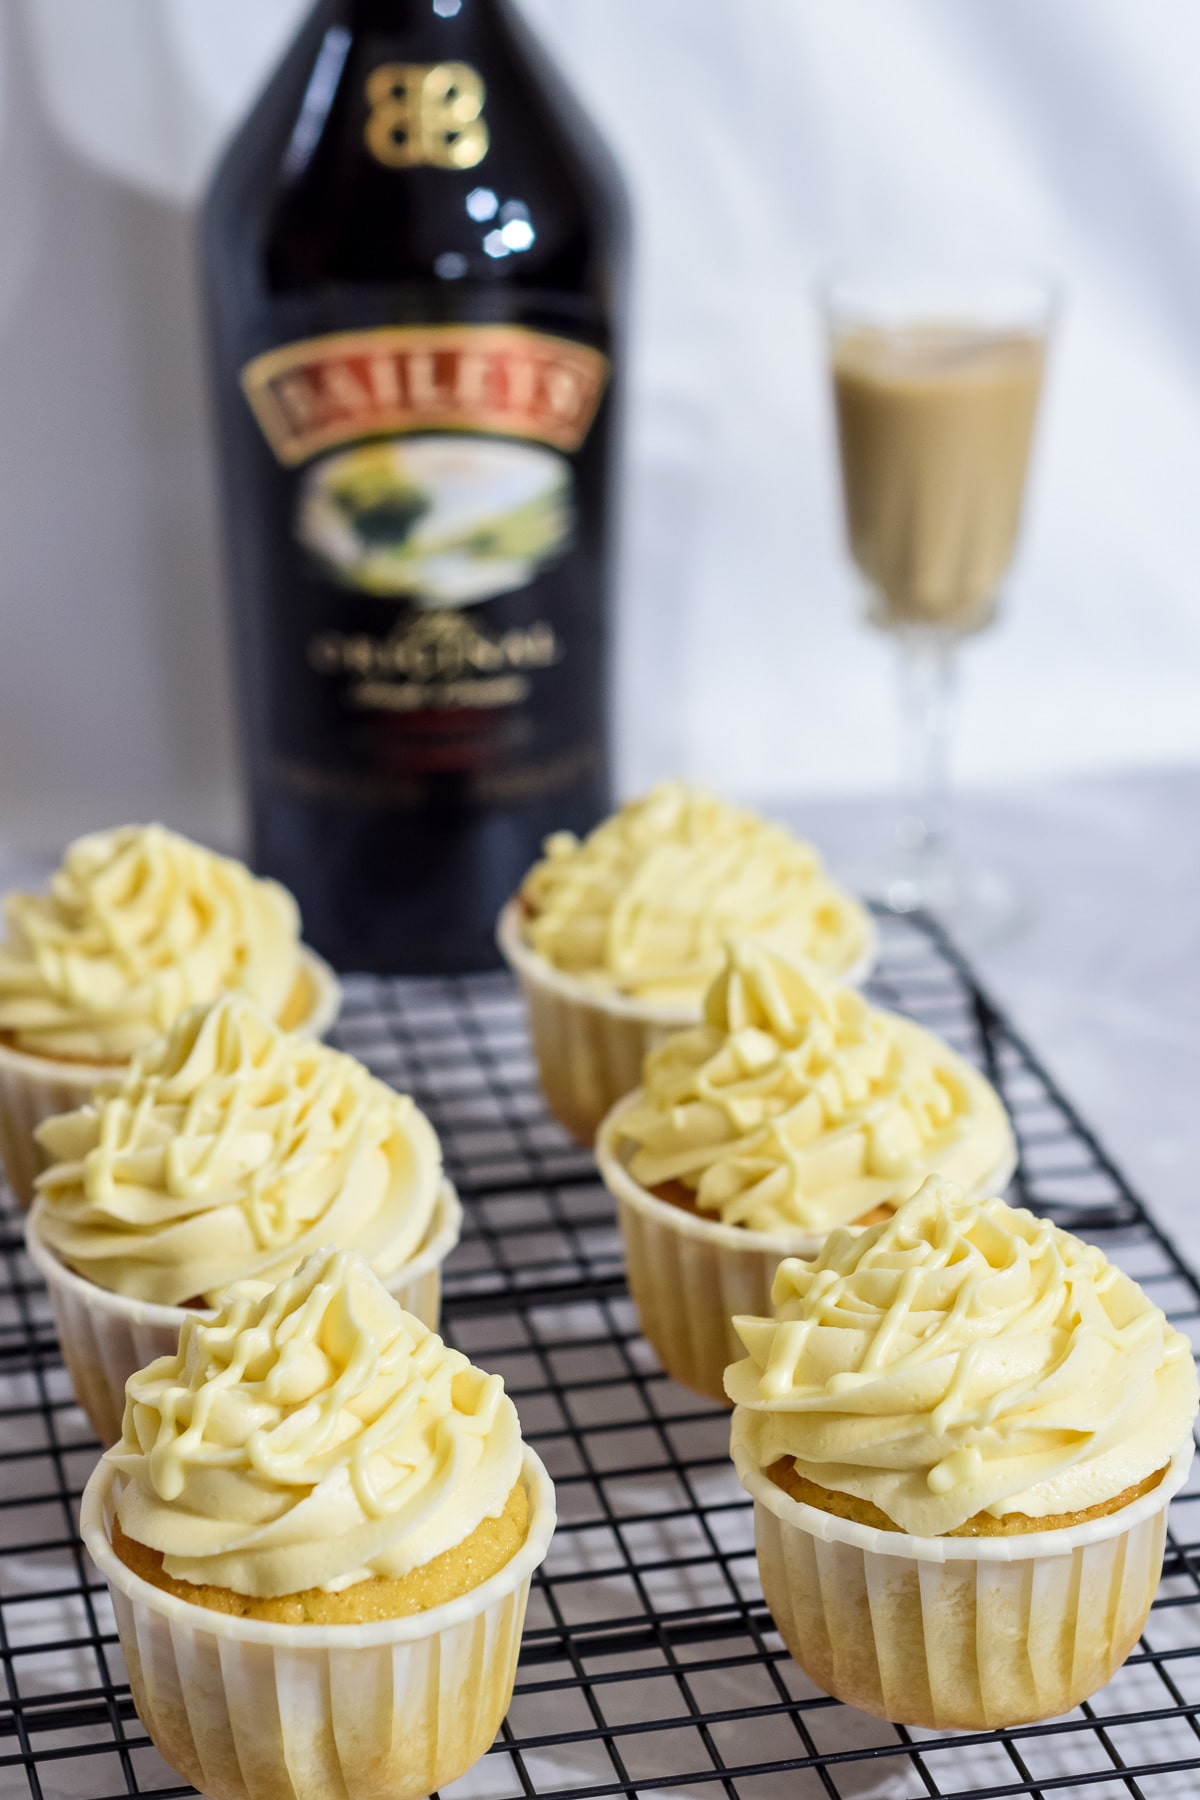 Bailey's Irish cream liqueur cupcakes with Bailey's frosting and white choc drizzle on rack with bottle of Baileys behind